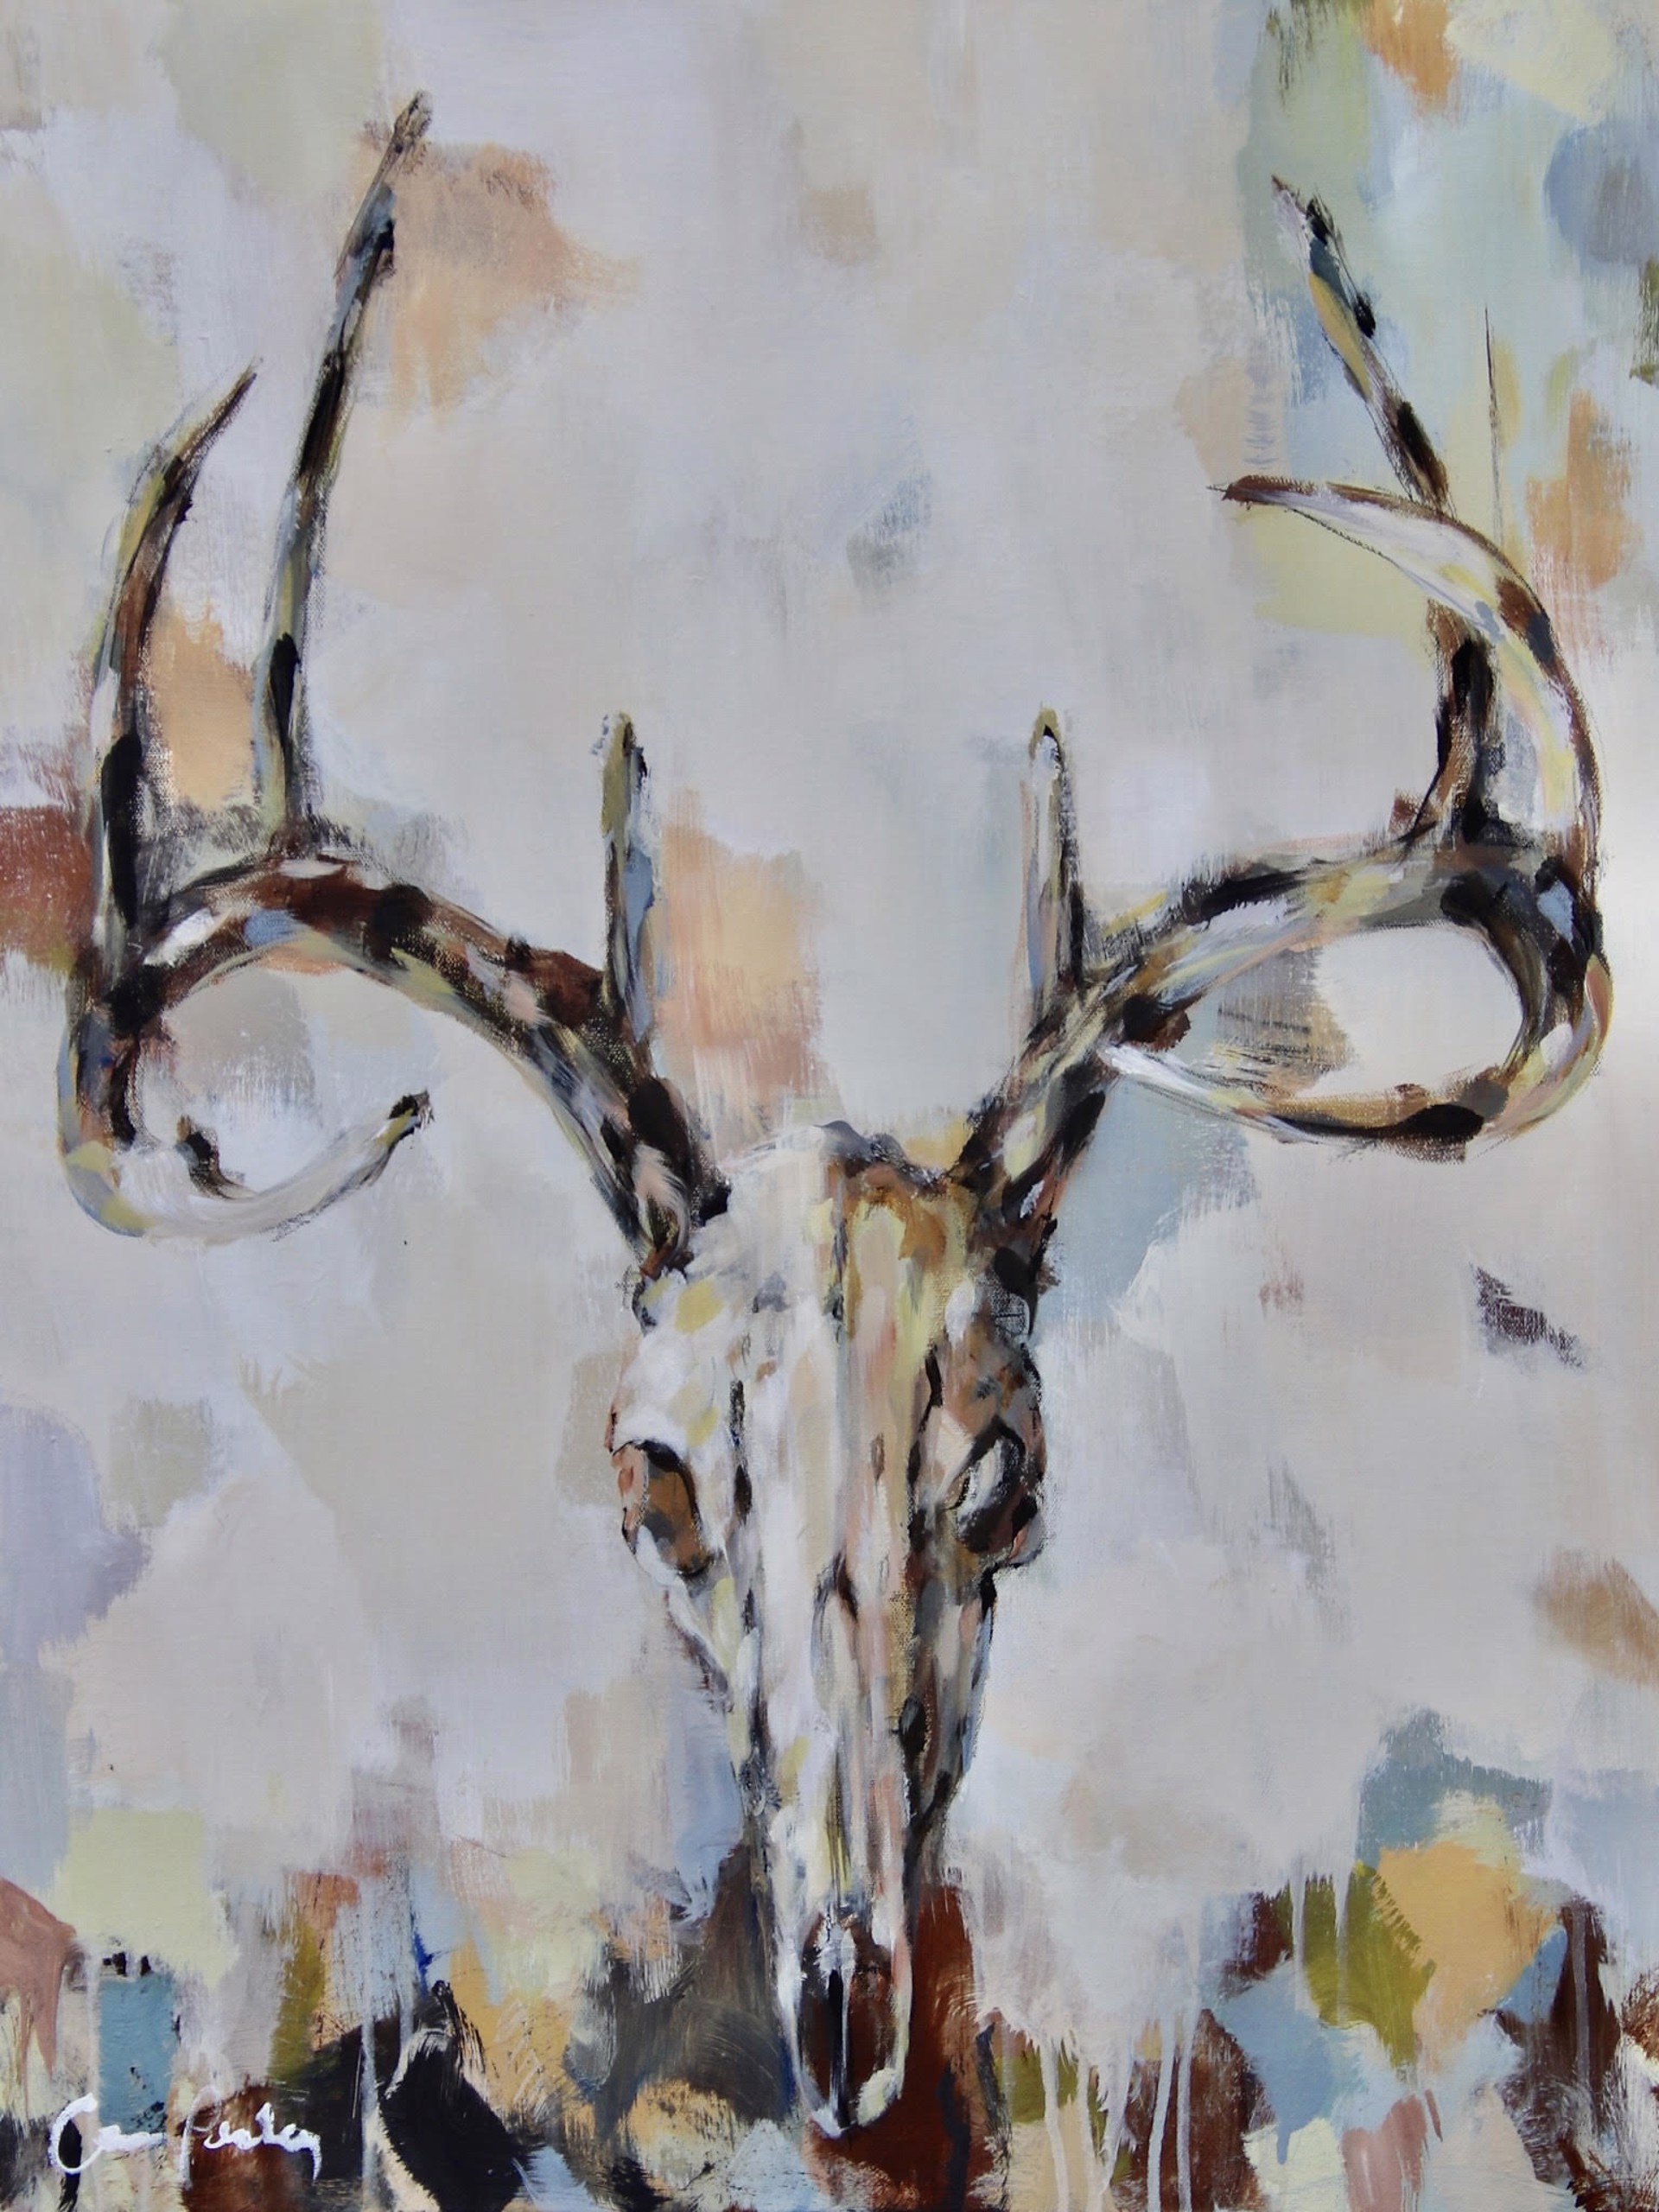 Original Acrylic Painting Of A Skull Featuring A Neutral Background, By Carrie Penley